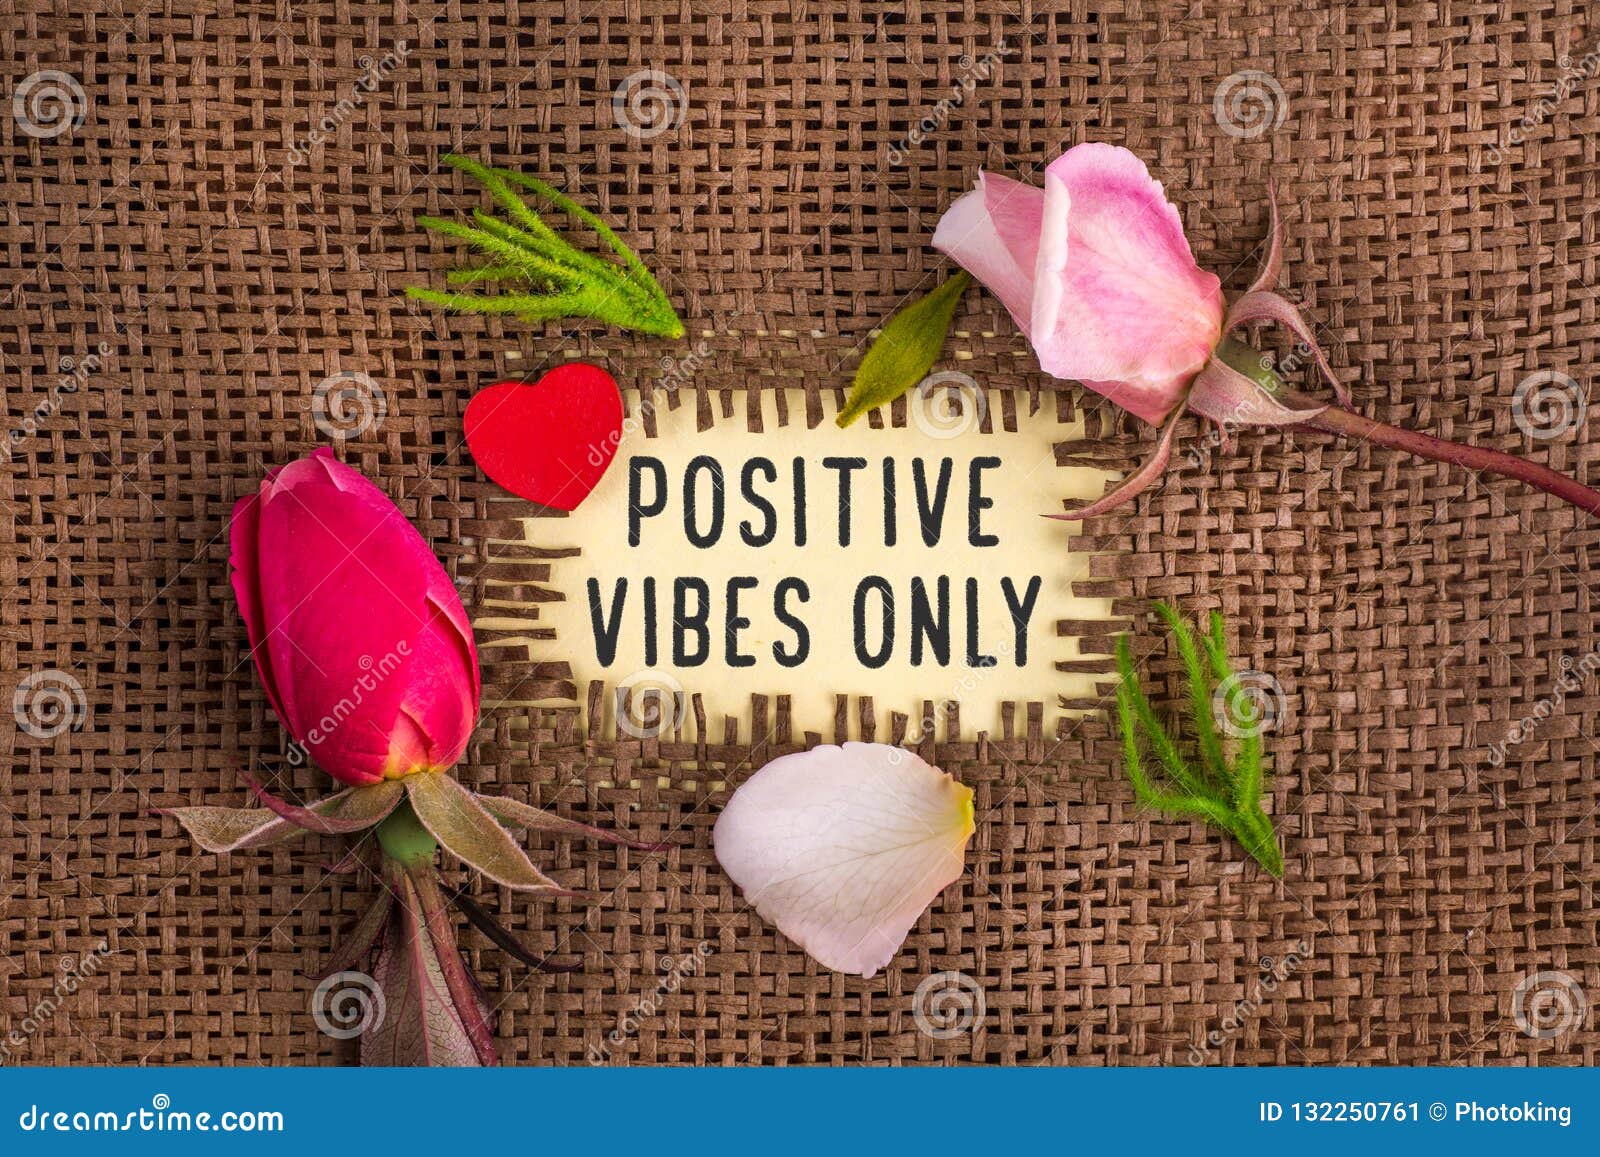 Positive Vibes only Written in Hole on the Burlap Stock Image ...